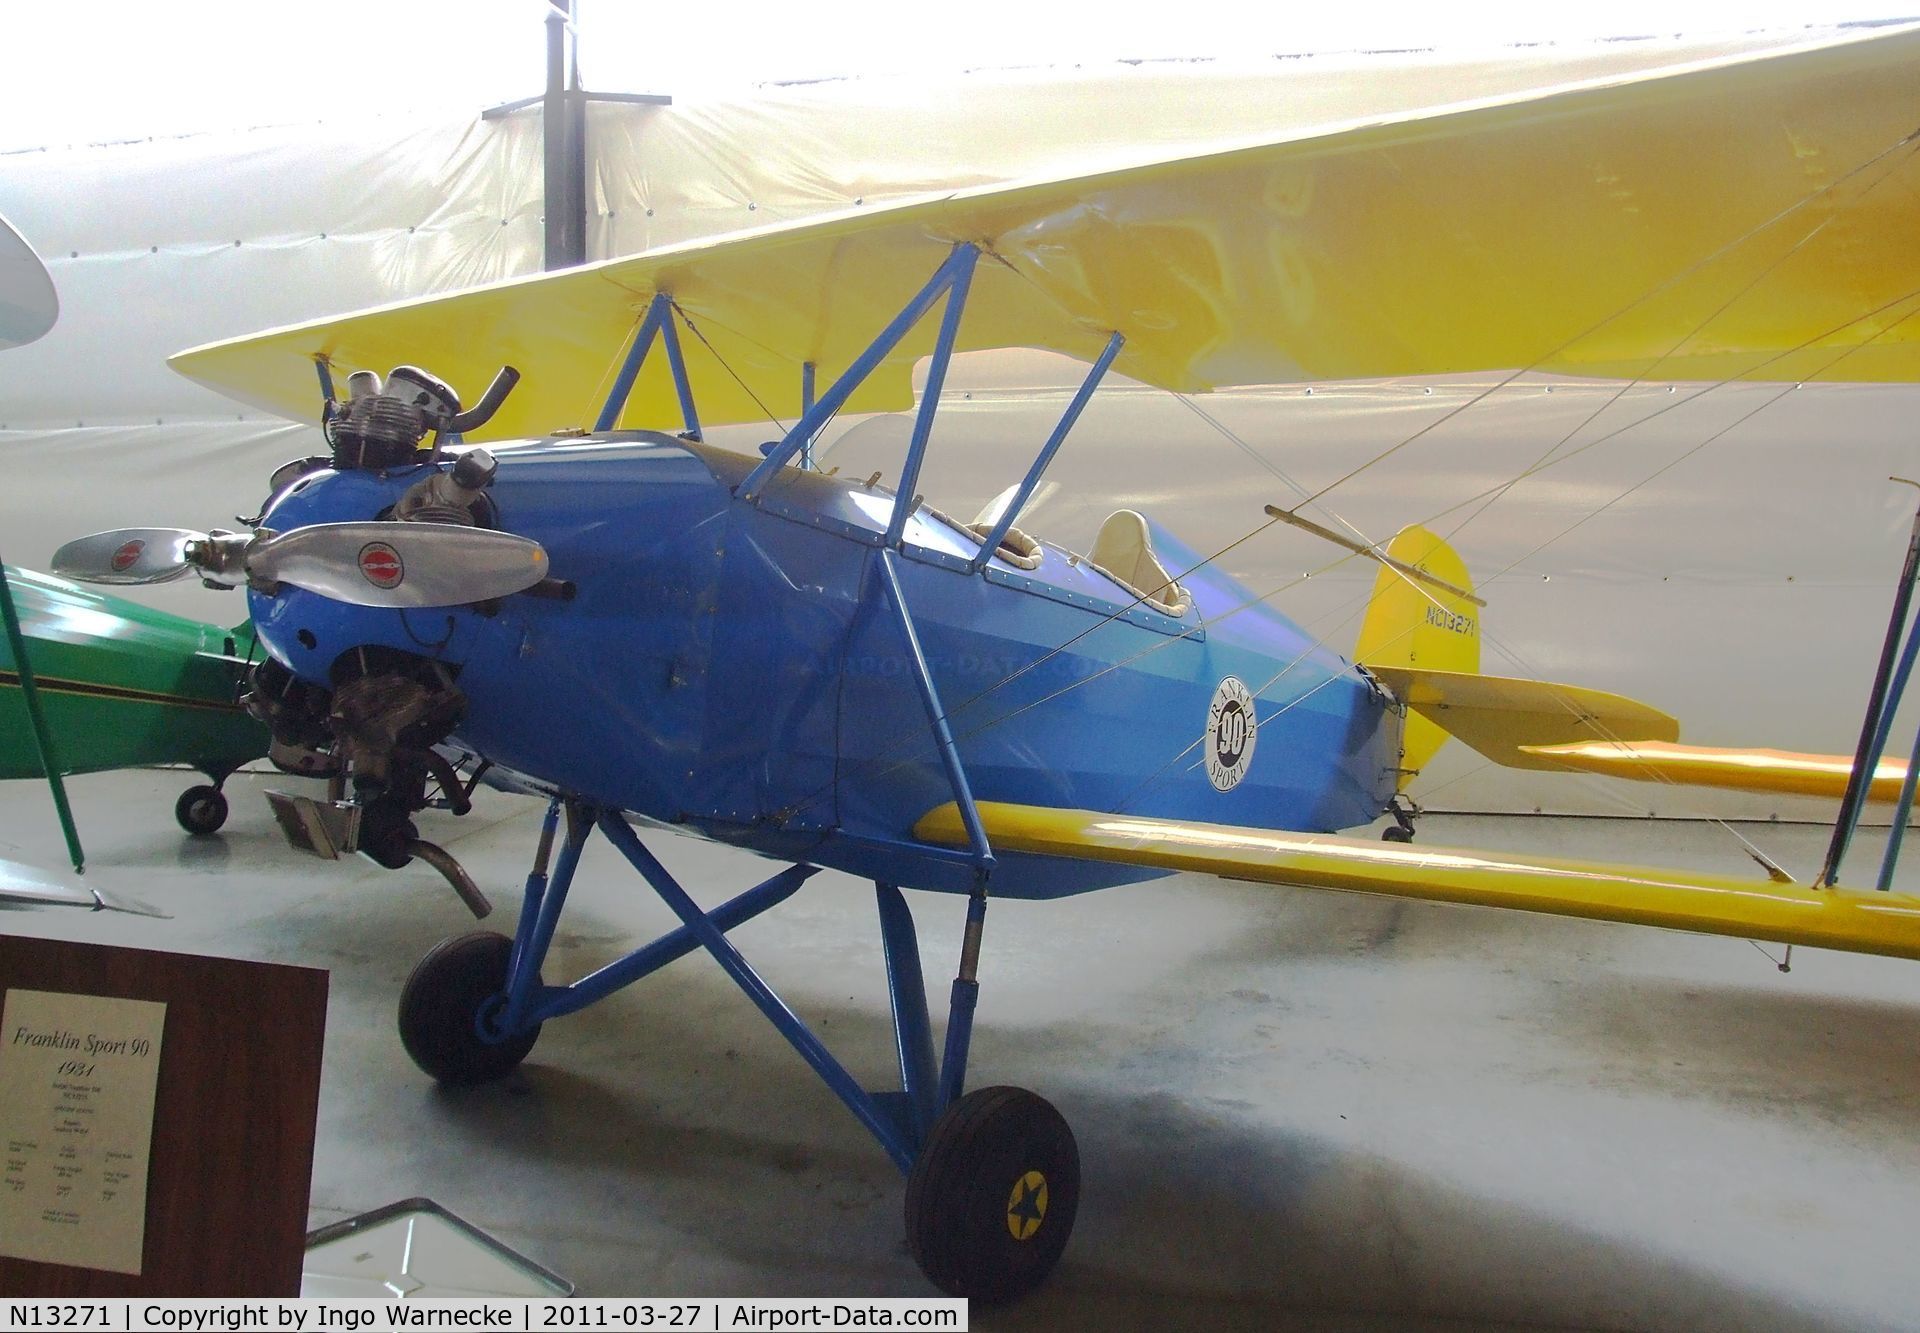 N13271, Franklin 90 C/N 106, Franklin Sport 90 at the Western Antique Aeroplane and Automobile Museum, Hood River OR